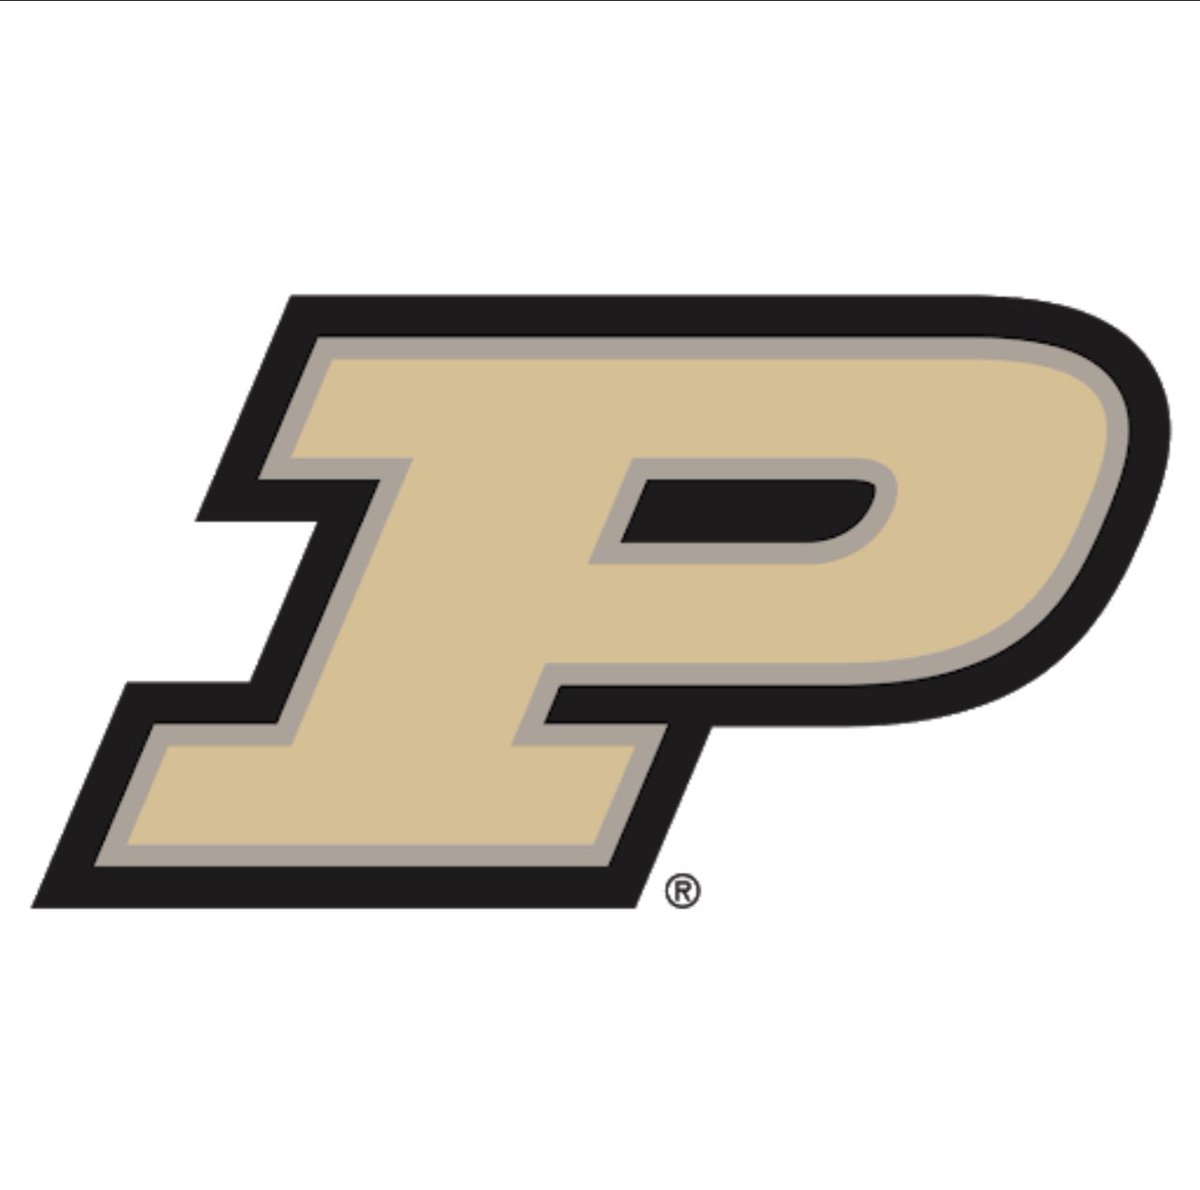 Blessed and thankful to have received an offer from @BoilerFootball @Coach_CPatt @LifeAtPurdue @CBASyrFootball @brucewill15 @RealCoachBruno1